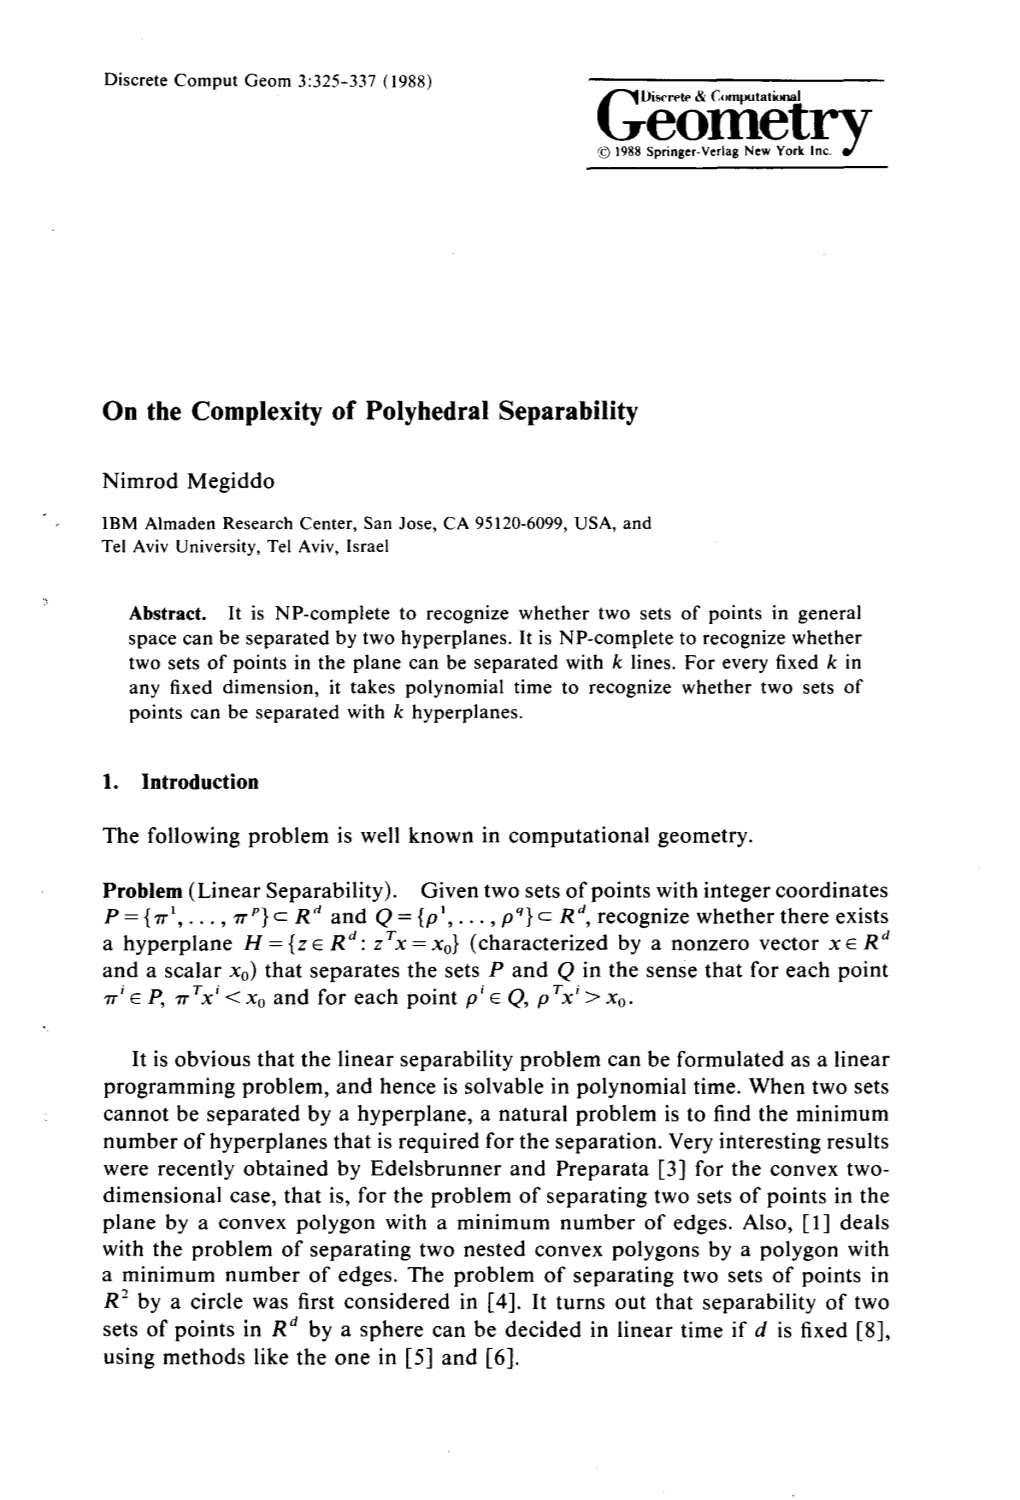 On the Complexity of Polyhedral Separability